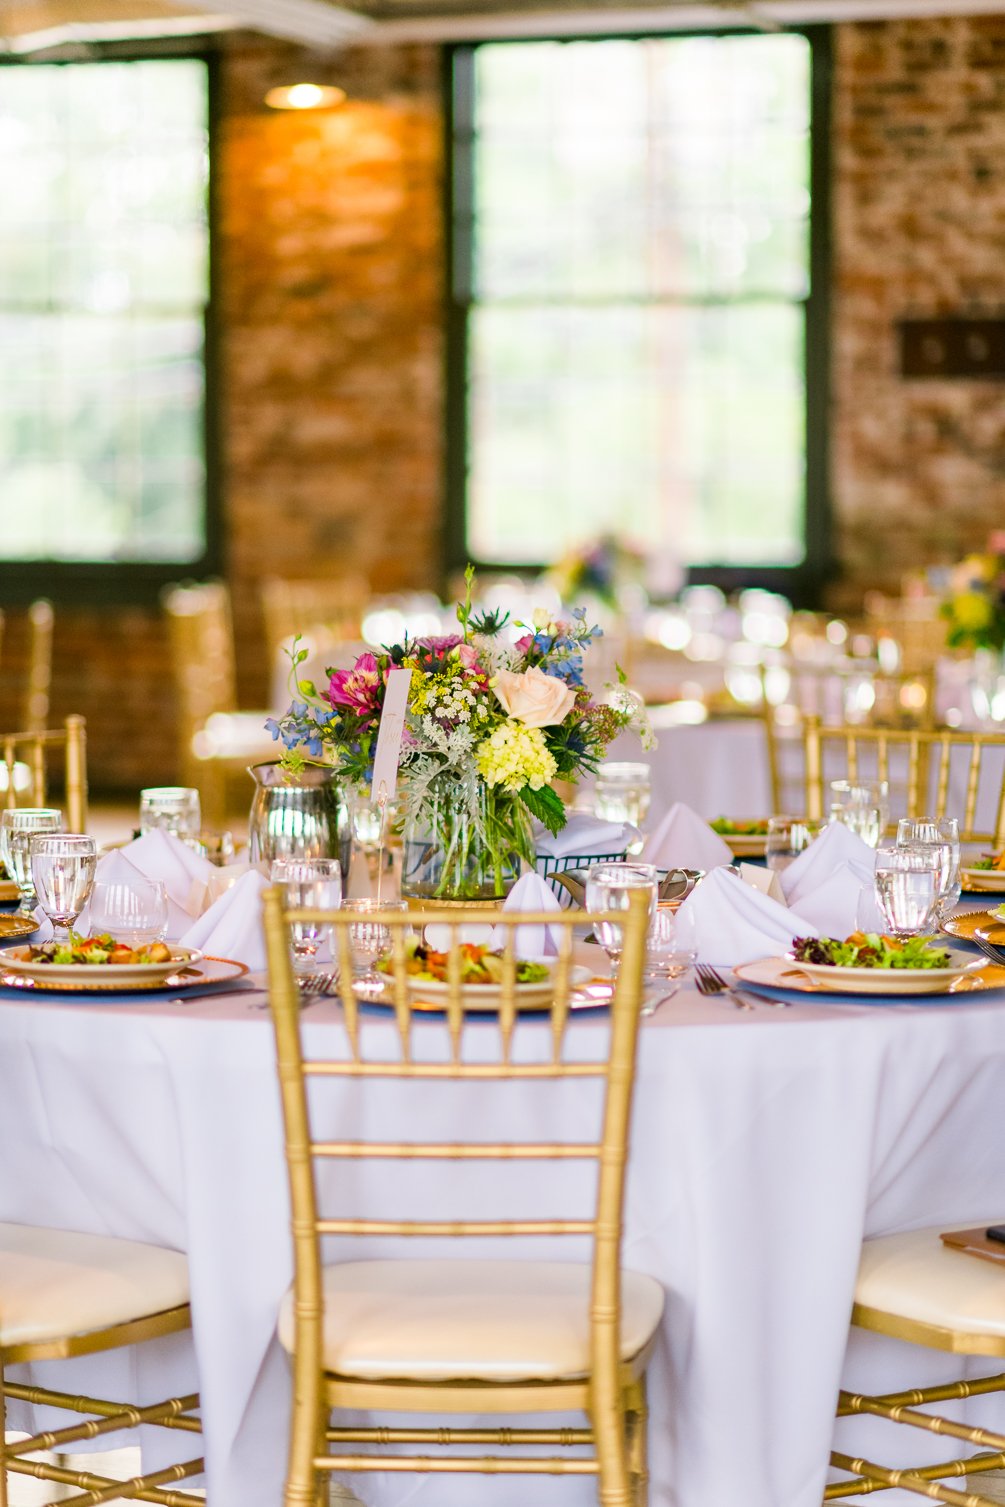 WoolenMill_TheSIlkMill_FredericksburgWeddingVenue_DowntownFredericksburg_VirginiaWeddingVenue_Event_BridalShow2023_youseephotography_pic36.jpg